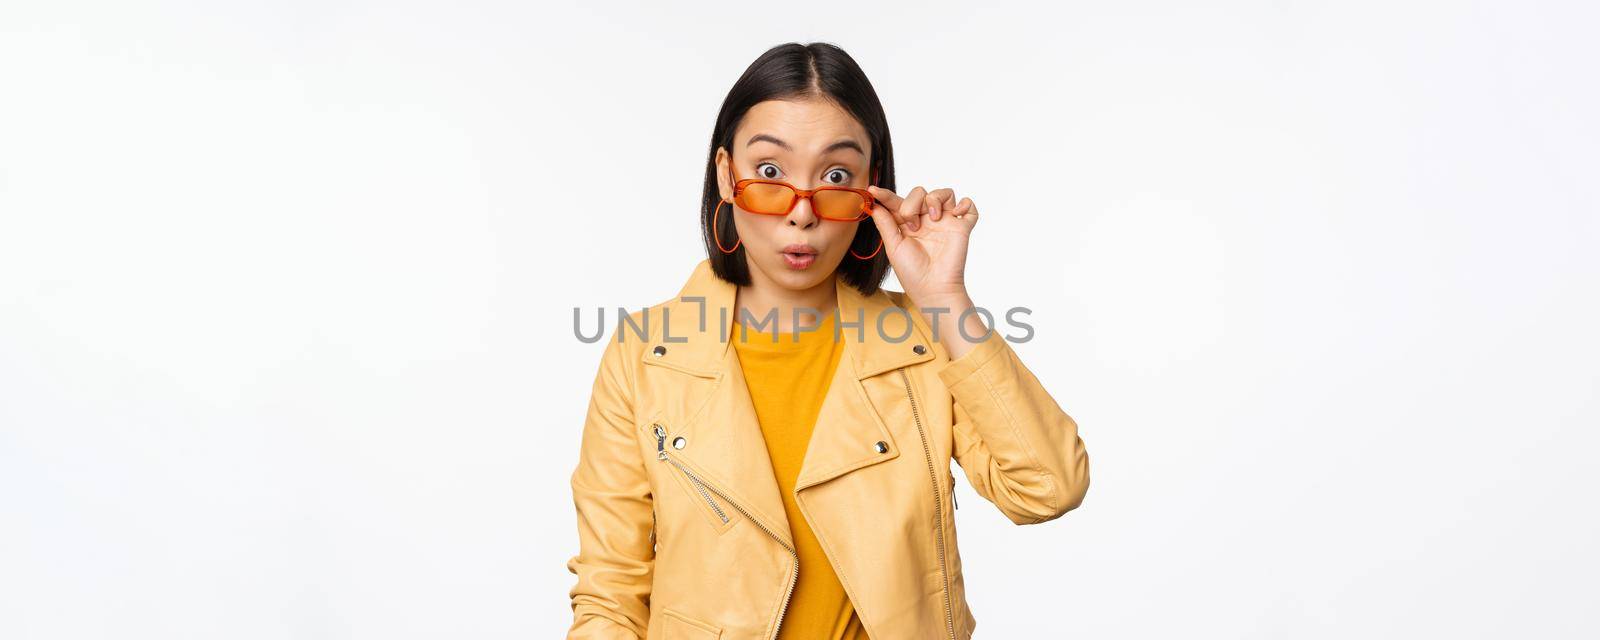 Portrait of asian brunette woman in stylish sunglasses, looks surprised and impressed at camera, checking out big news, wow face expression, standing over white background.